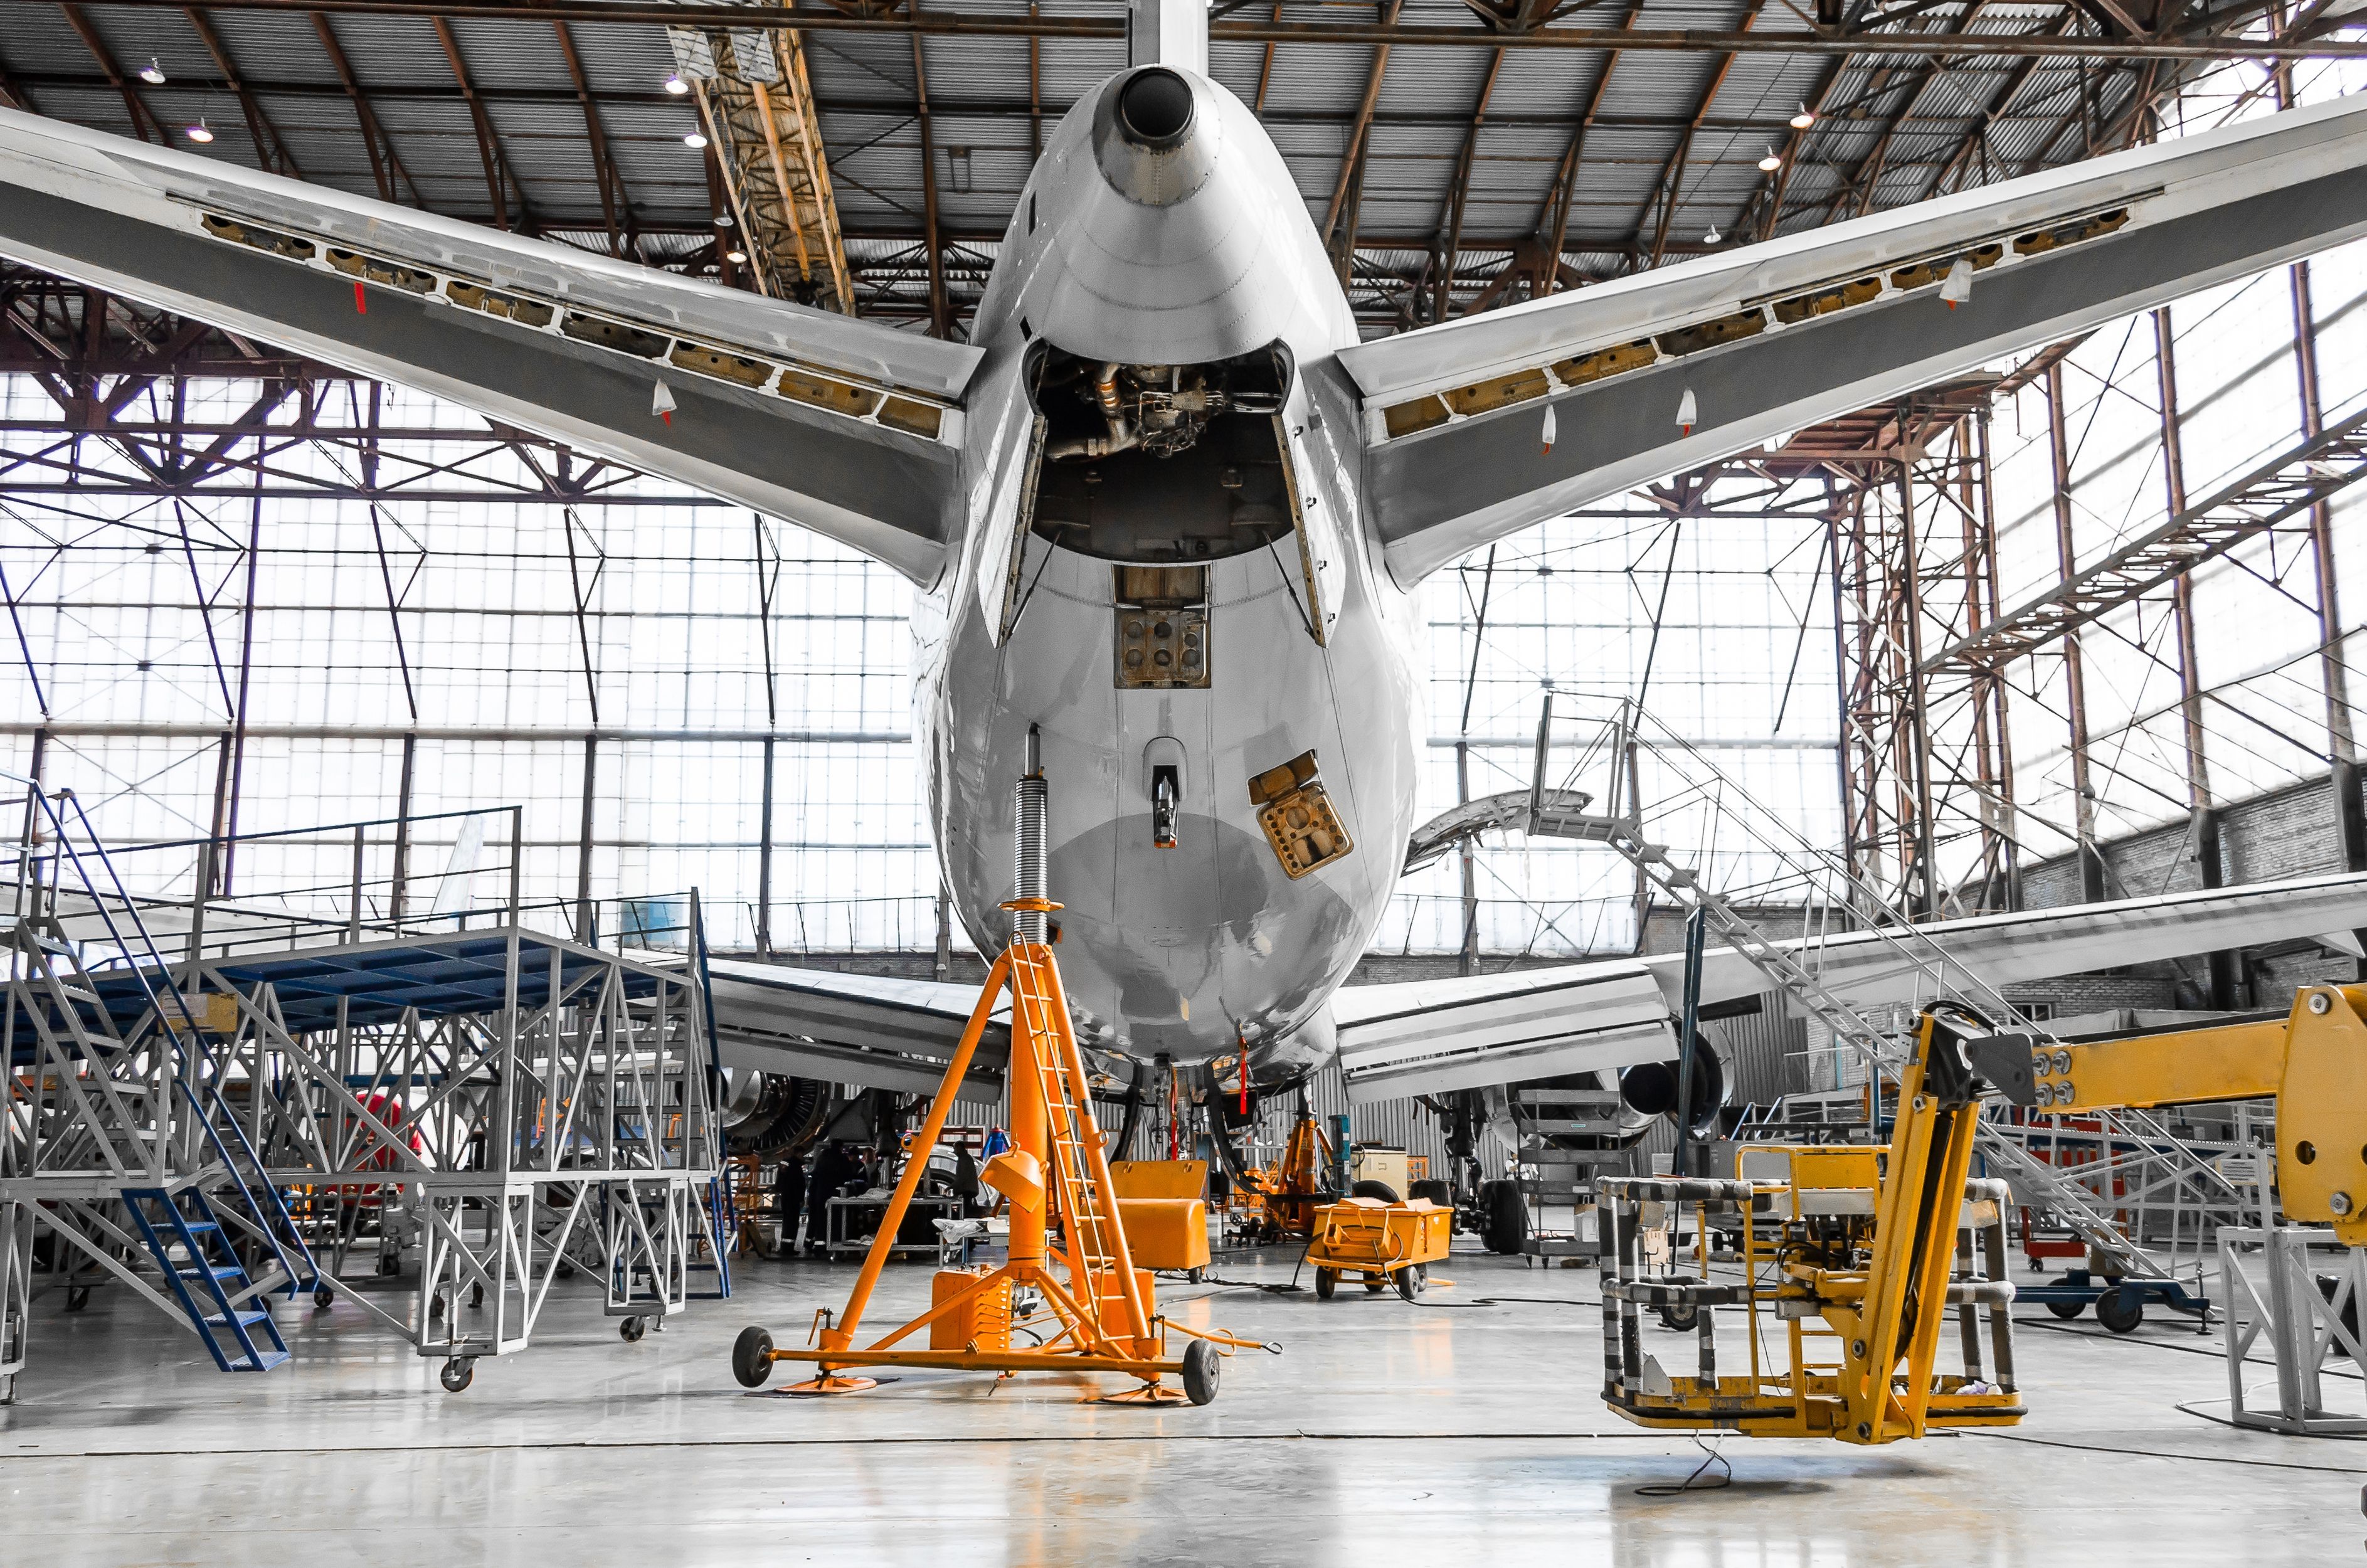 Large passenger aircraft on service in an aviation hangar rear view of the tail